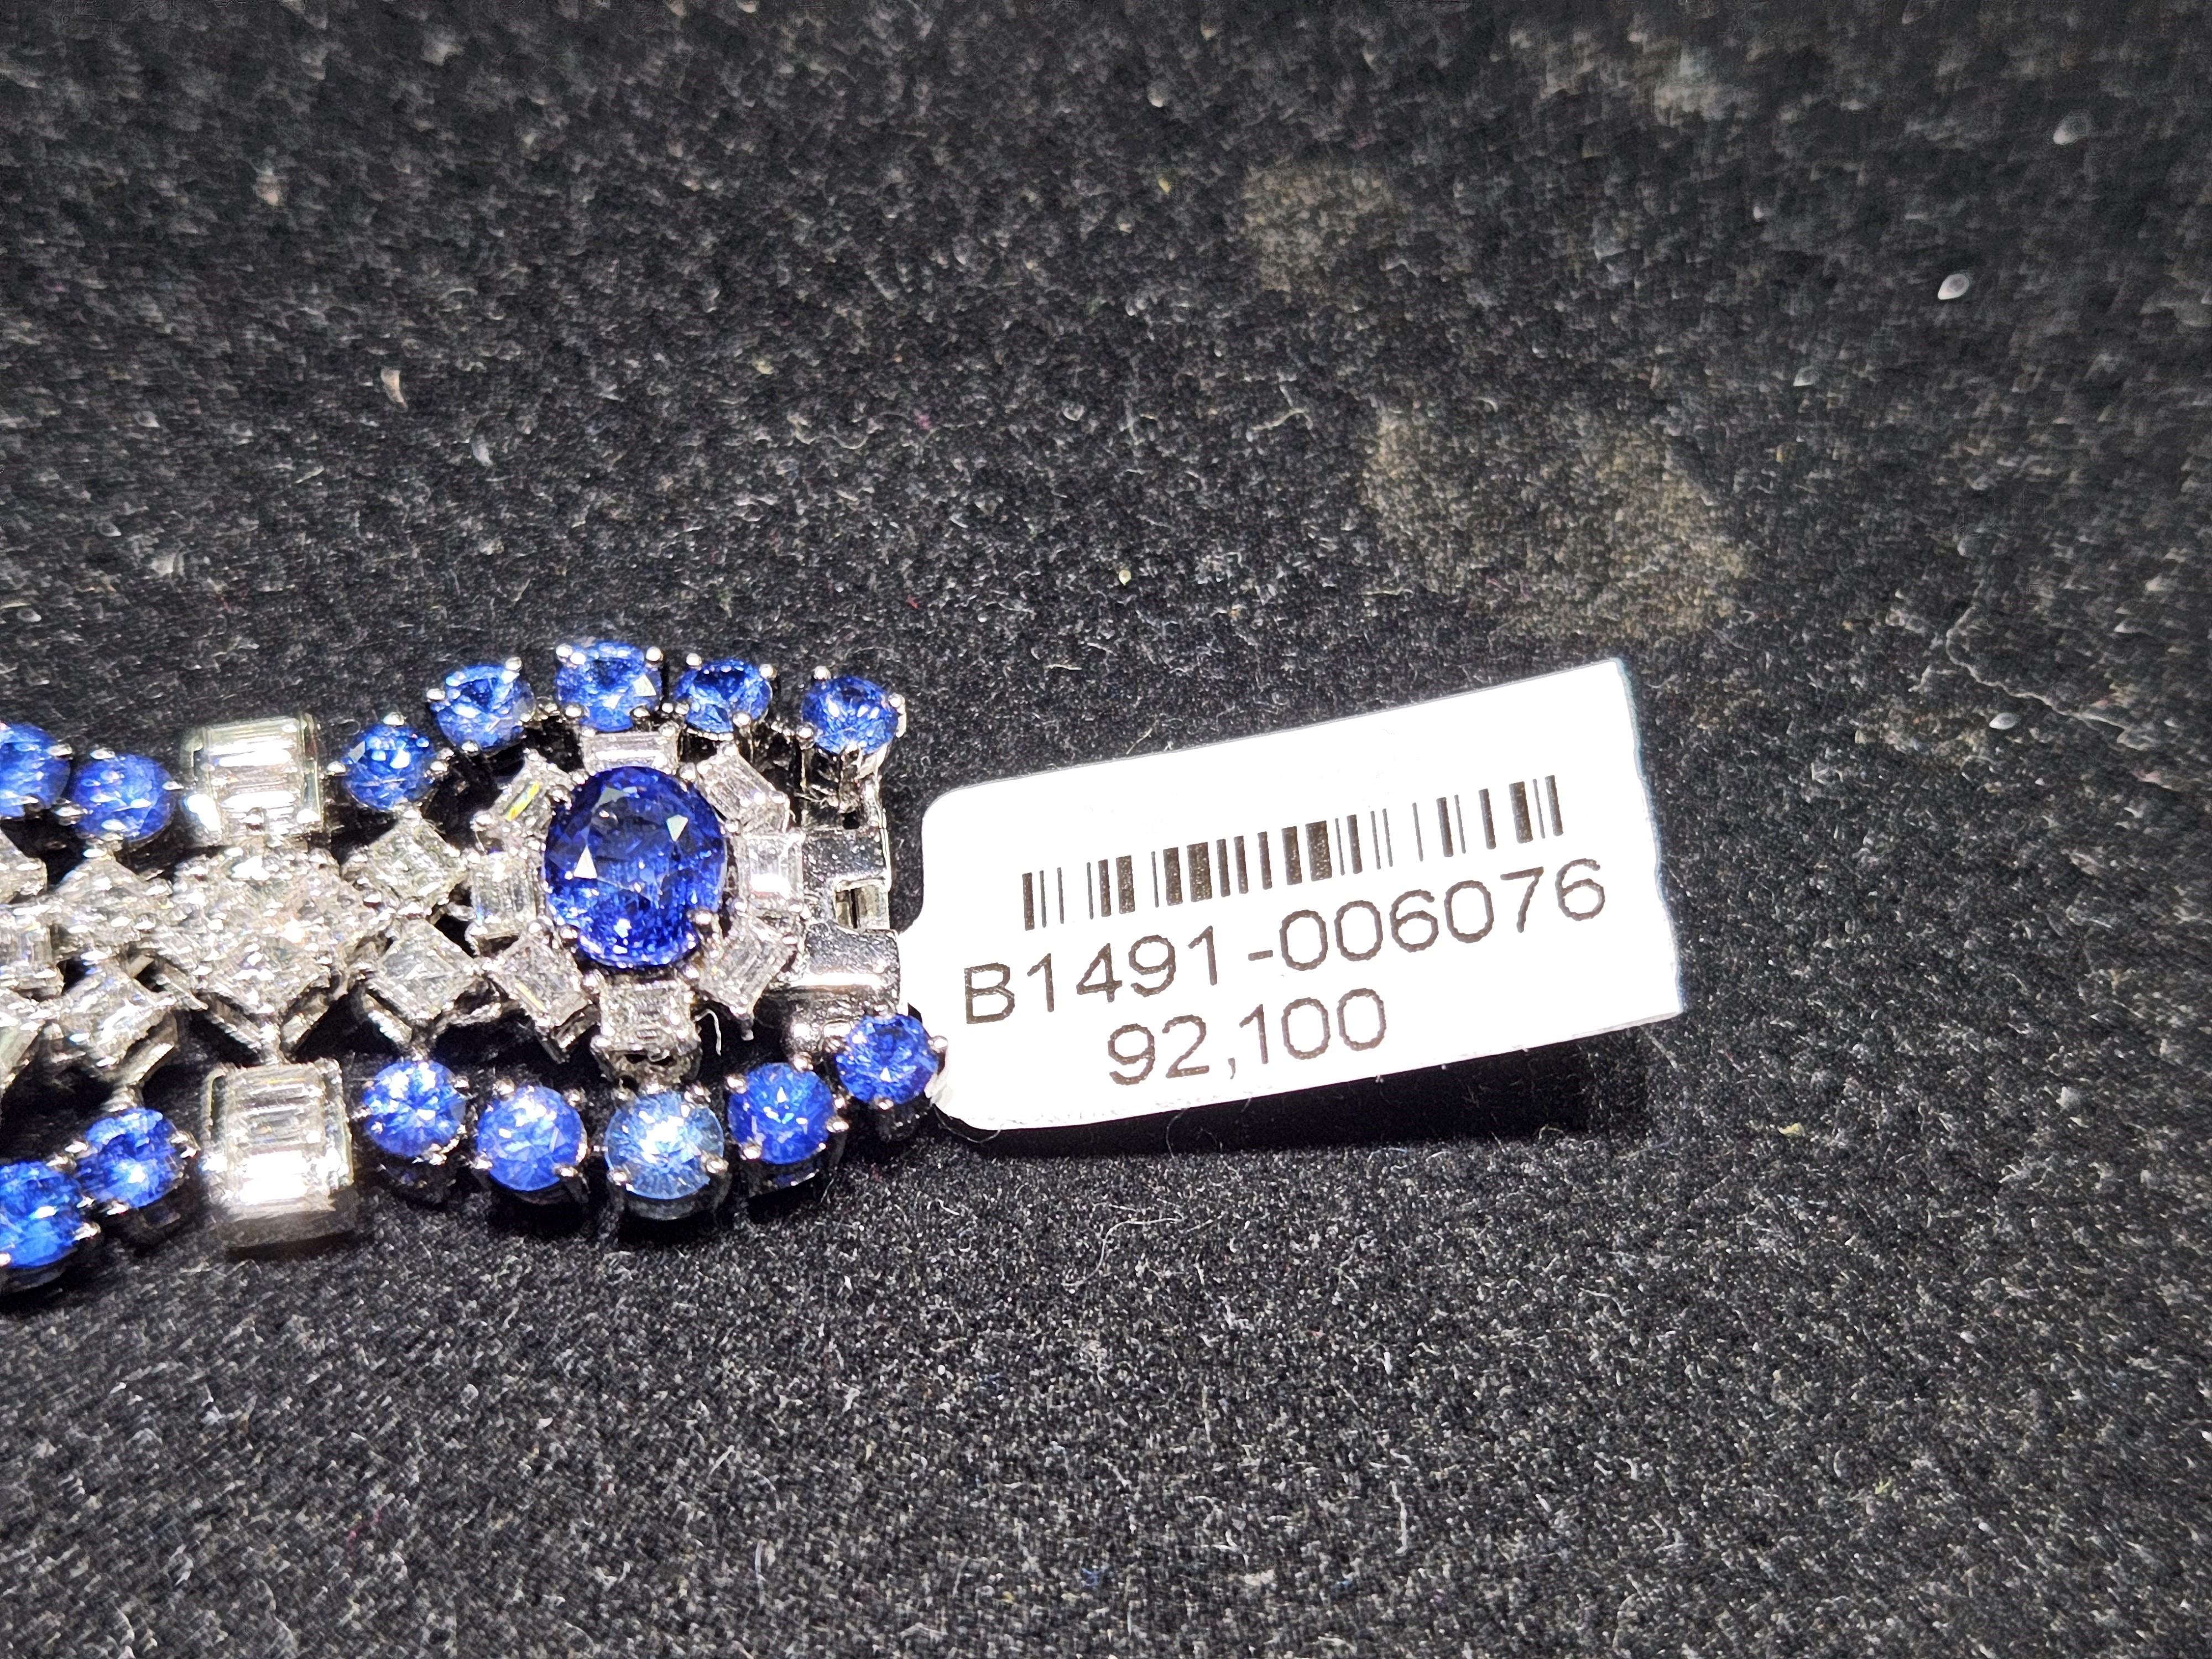 NWT $92, 100 Rare 18KT Gold Fancy 20CT Ceylon Blue Sapphire Diamond Bracelet In New Condition For Sale In New York, NY